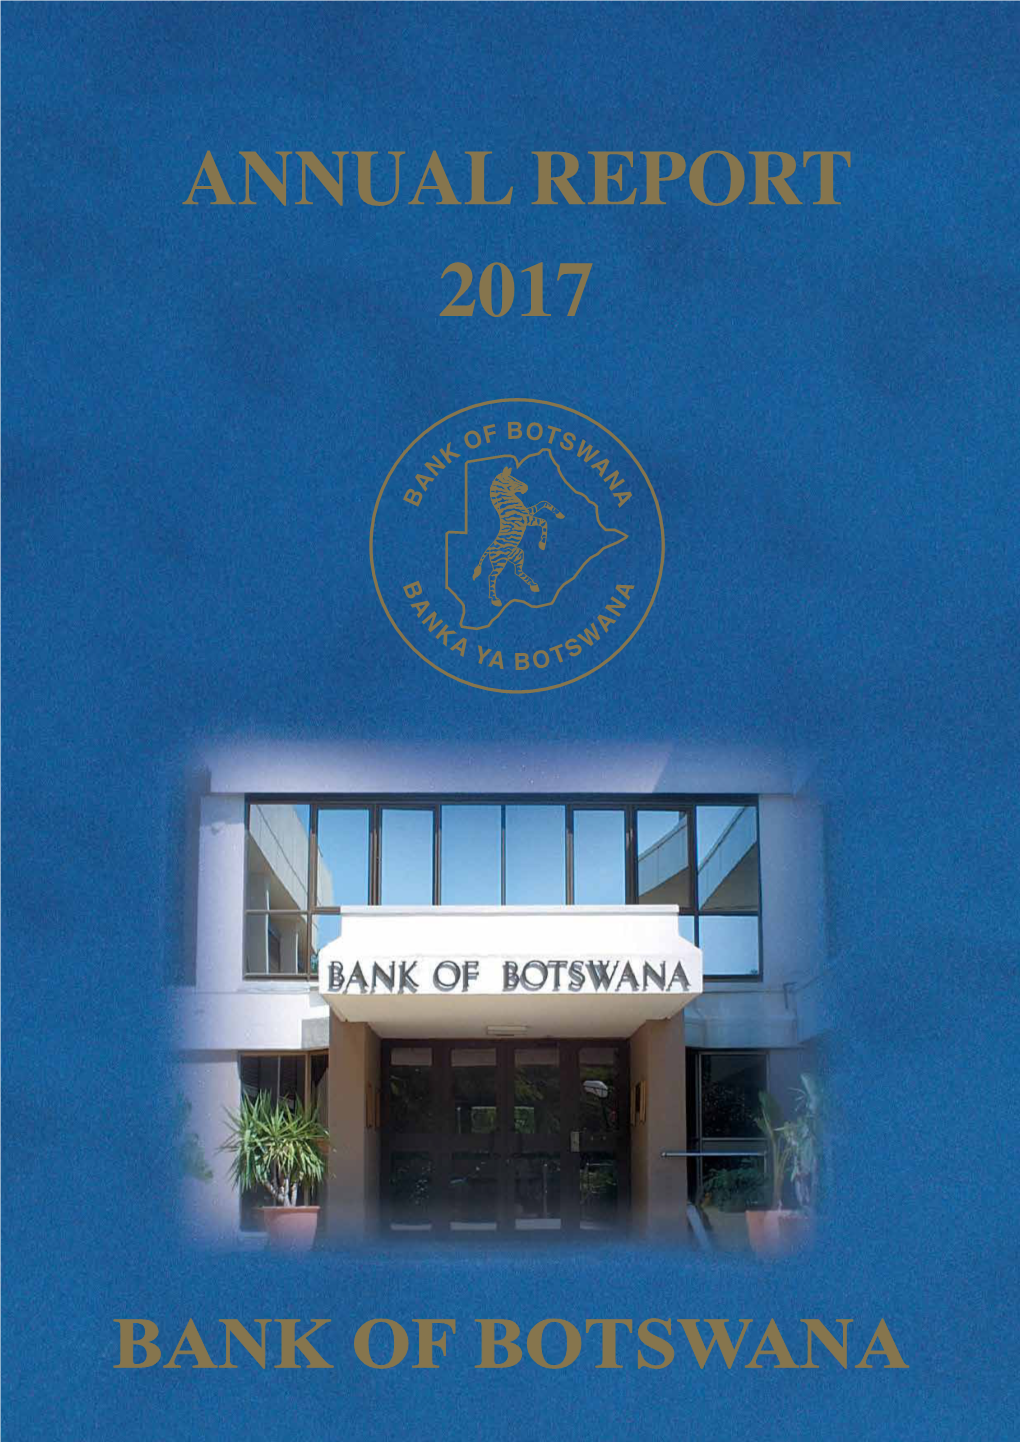 2017 Annual Report Is Published in Accordance with Section 68(1) of the Bank of Botswana Act (CAP 55:01)